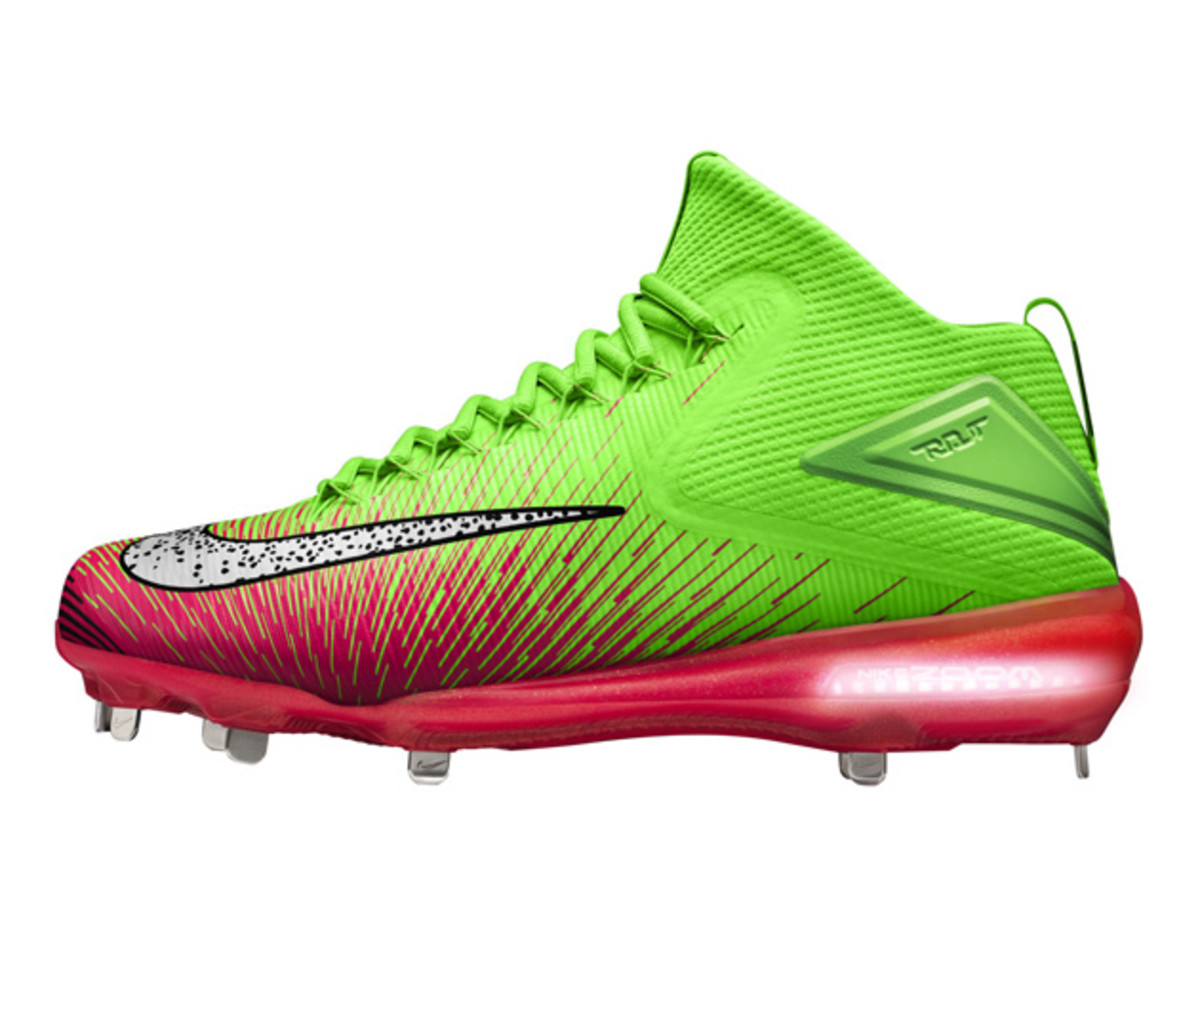 Nike reveals third signature cleat for Mike Trout - Sports Illustrated